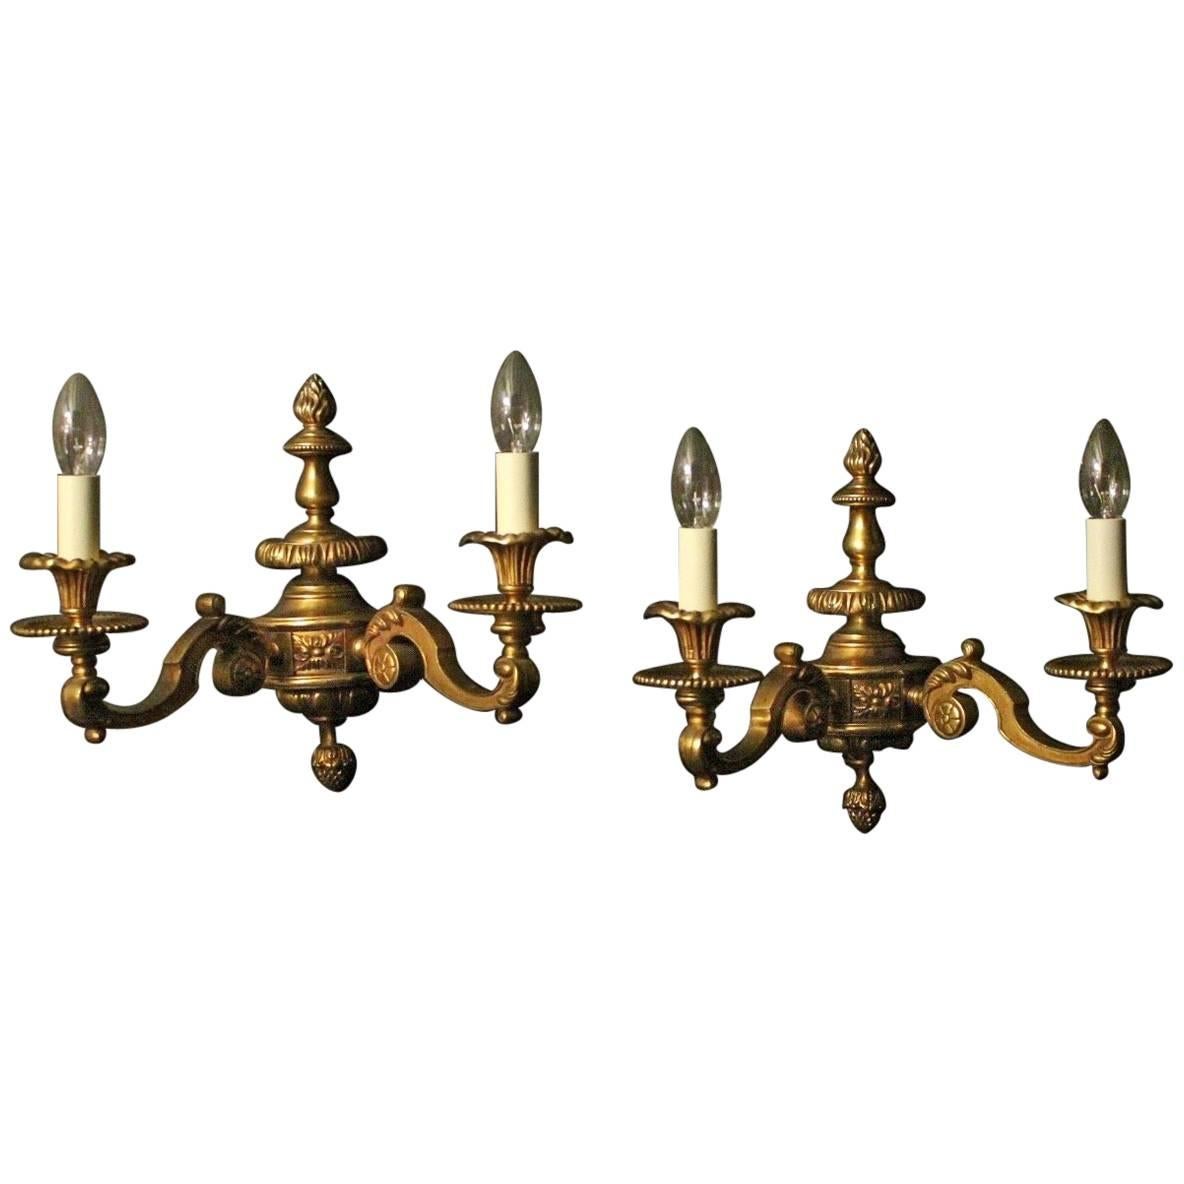 English Pair of Gilded Bronze Late 19th Century Antique Wall Lights